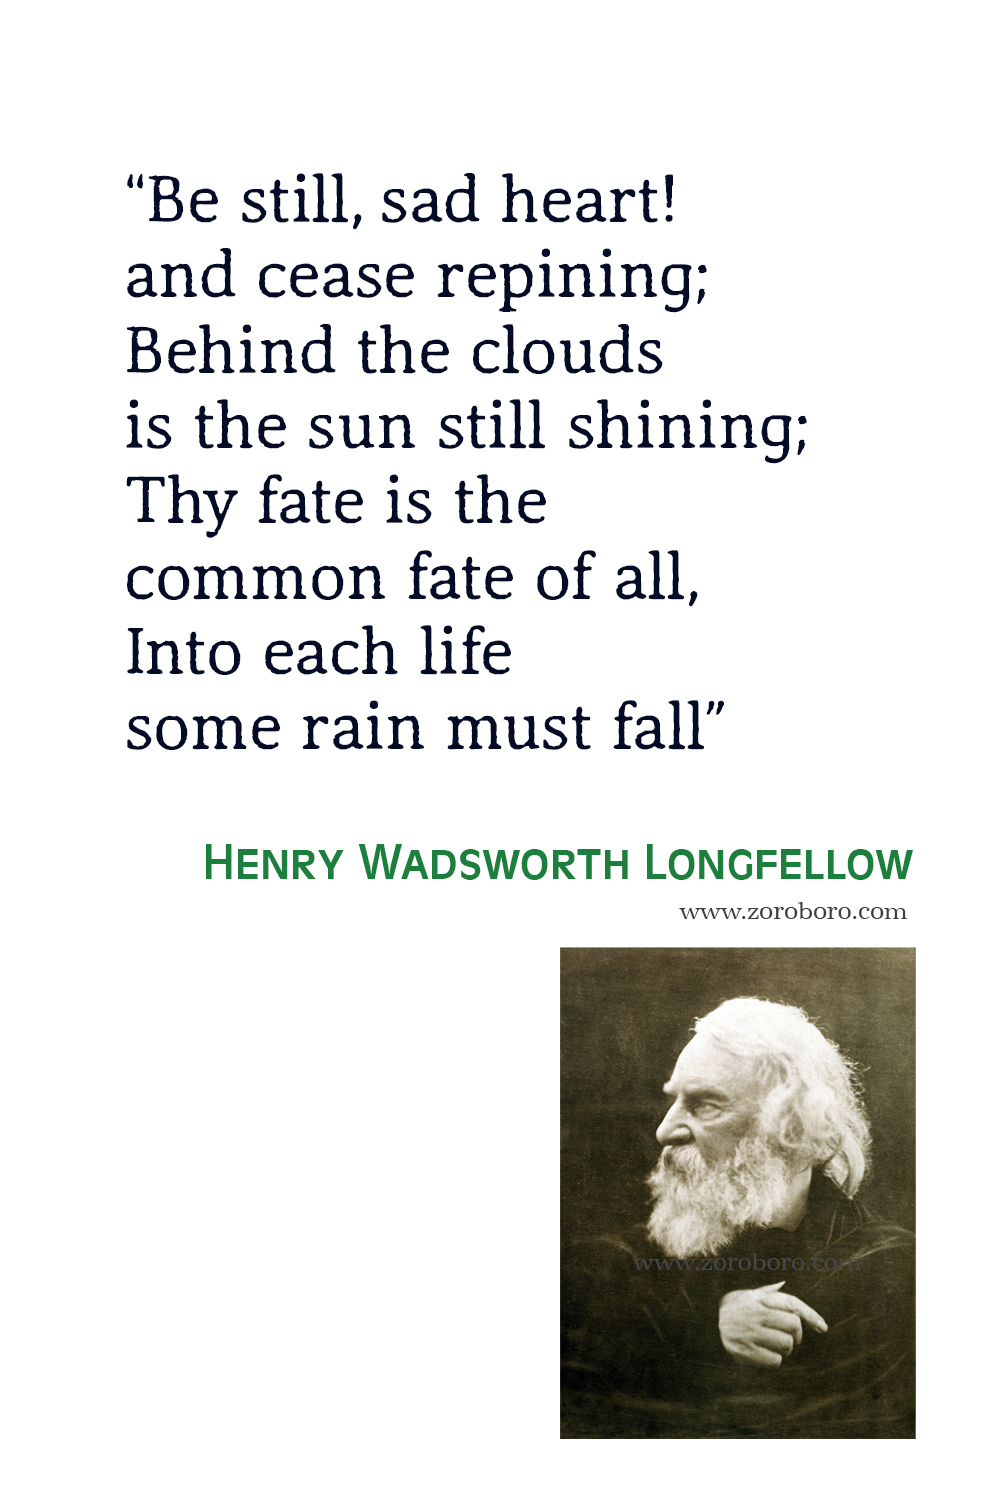 Henry Wadsworth Longfellow Quotes, Henry Wadsworth Longfellow Poems, Books, Henry Wadsworth Longfellow Poetry, Motivational Quotes.